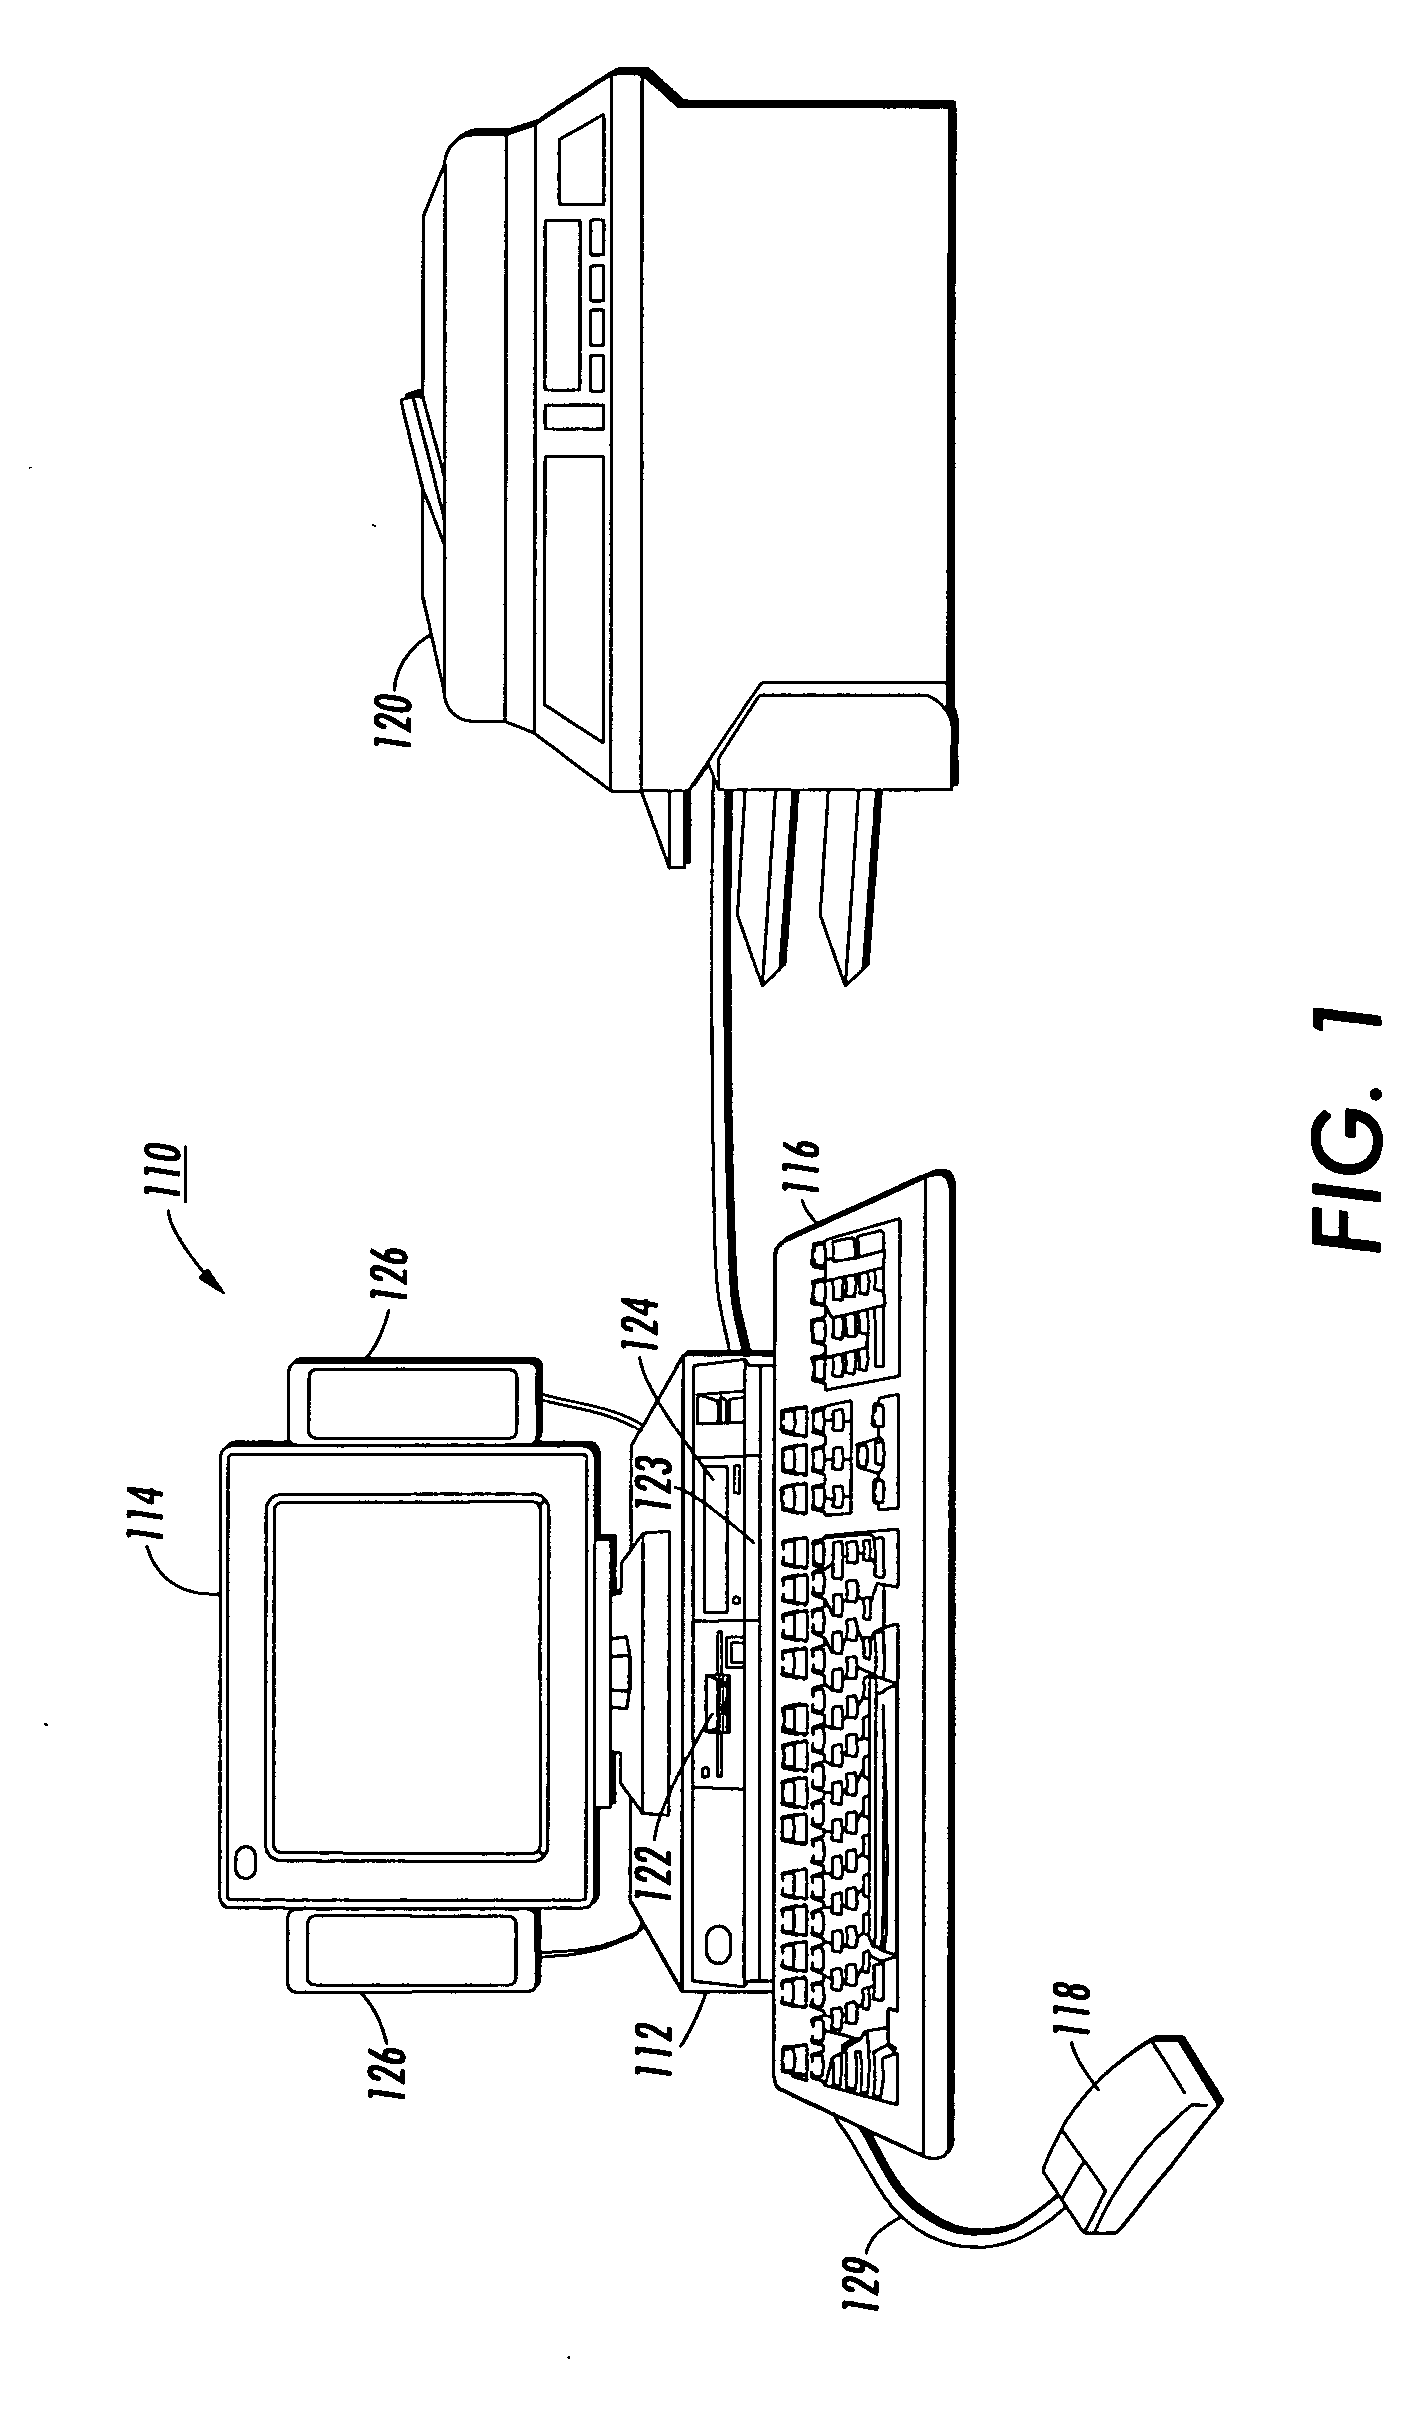 Methods and systems in a computer network for enhanced electronic document security